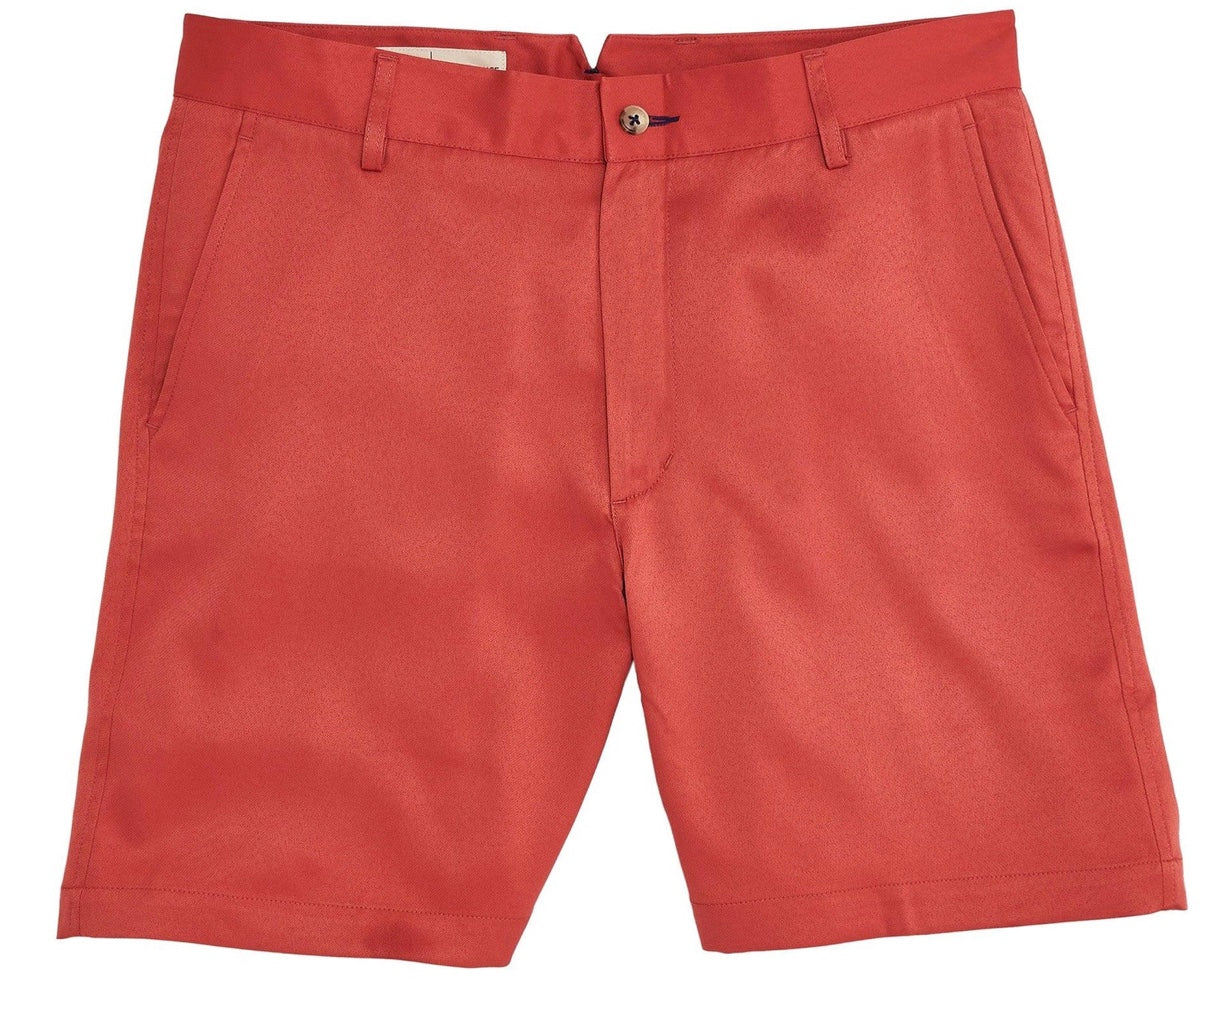 Onward Reserve Gimme Performance Golf Short in Mineral Red